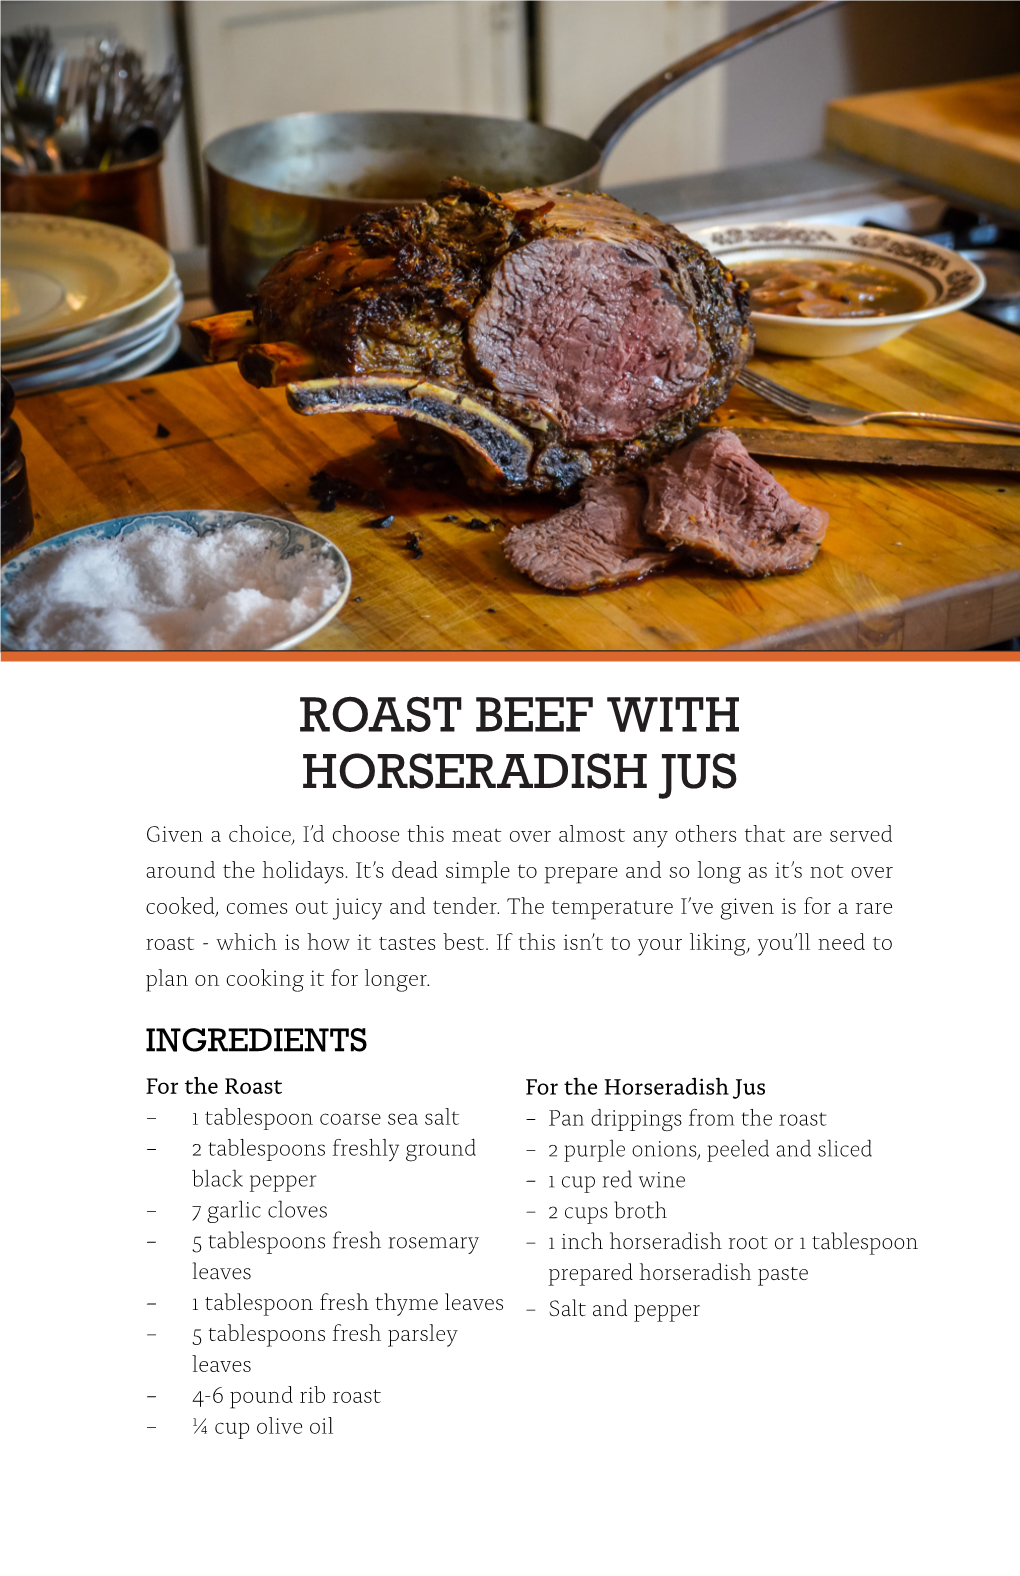 ROAST BEEF with HORSERADISH JUS Given a Choice, I’D Choose This Meat Over Almost Any Others That Are Served Around the Holidays